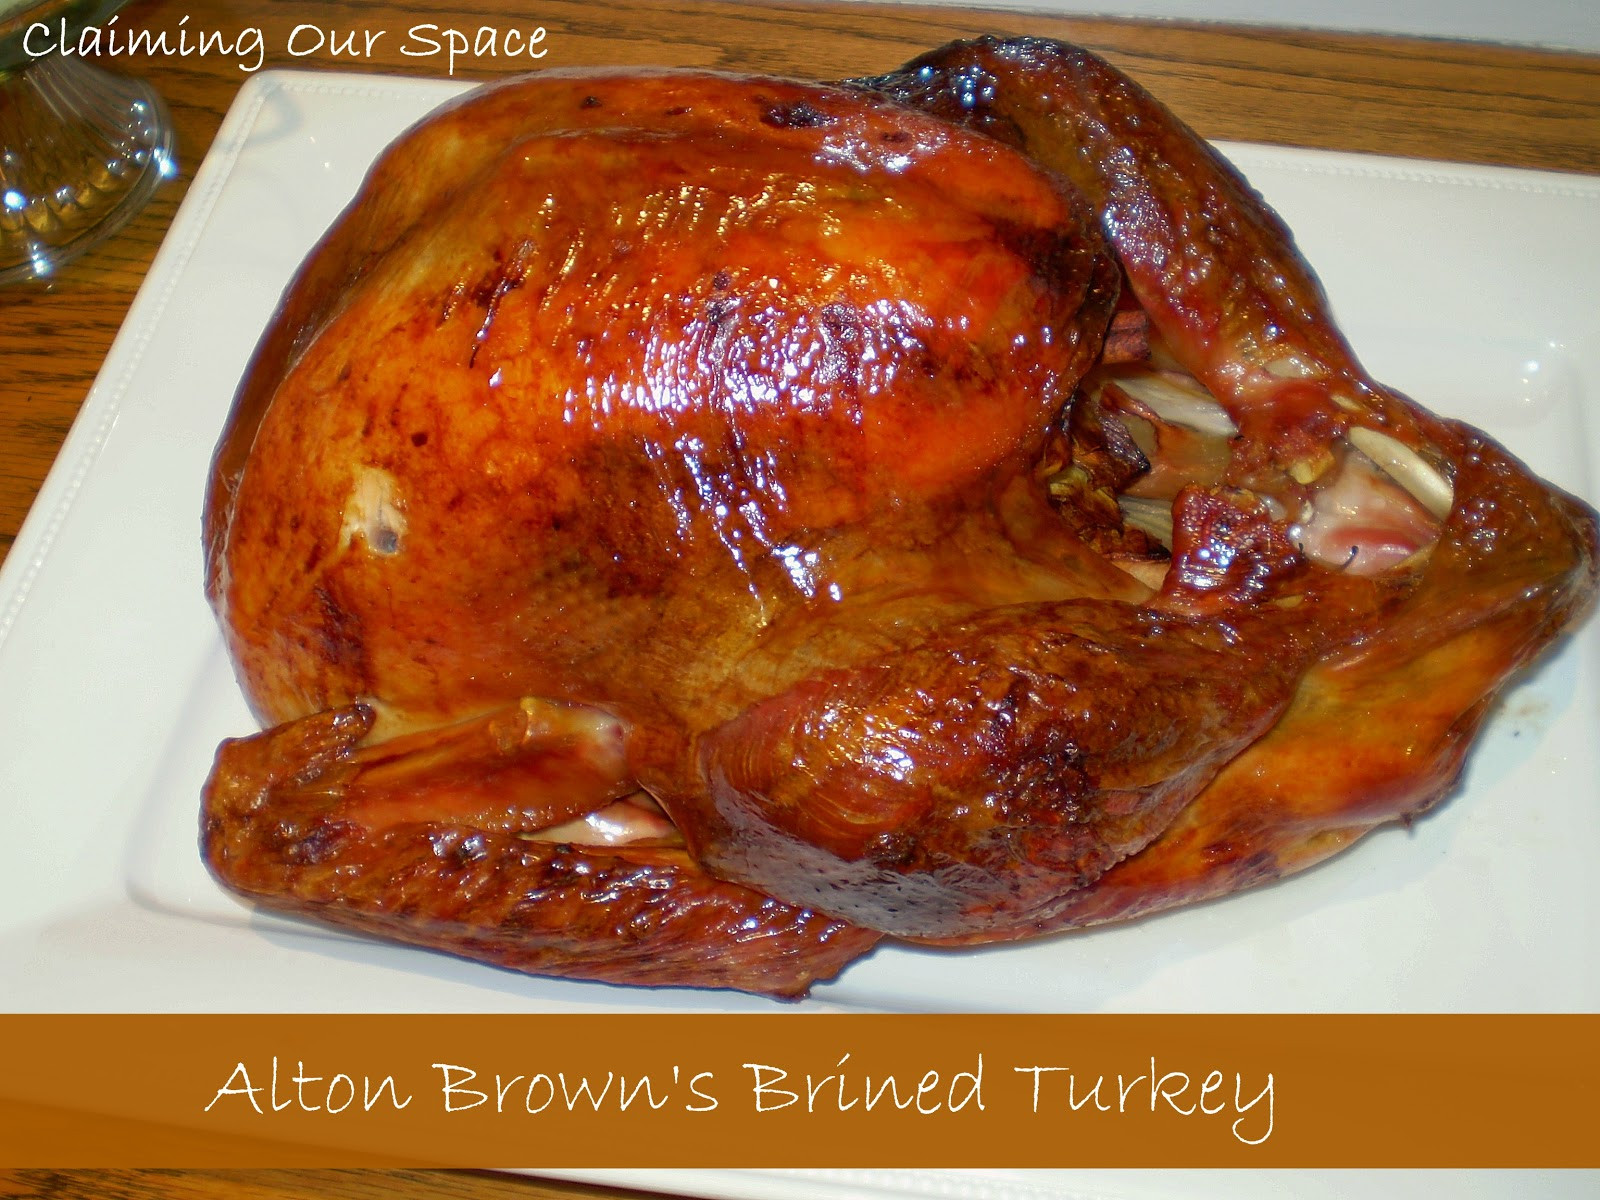 Alton Brown Thanksgiving Turkey
 Claiming Our Space Thanksgiving Treats and Fall Fun Link